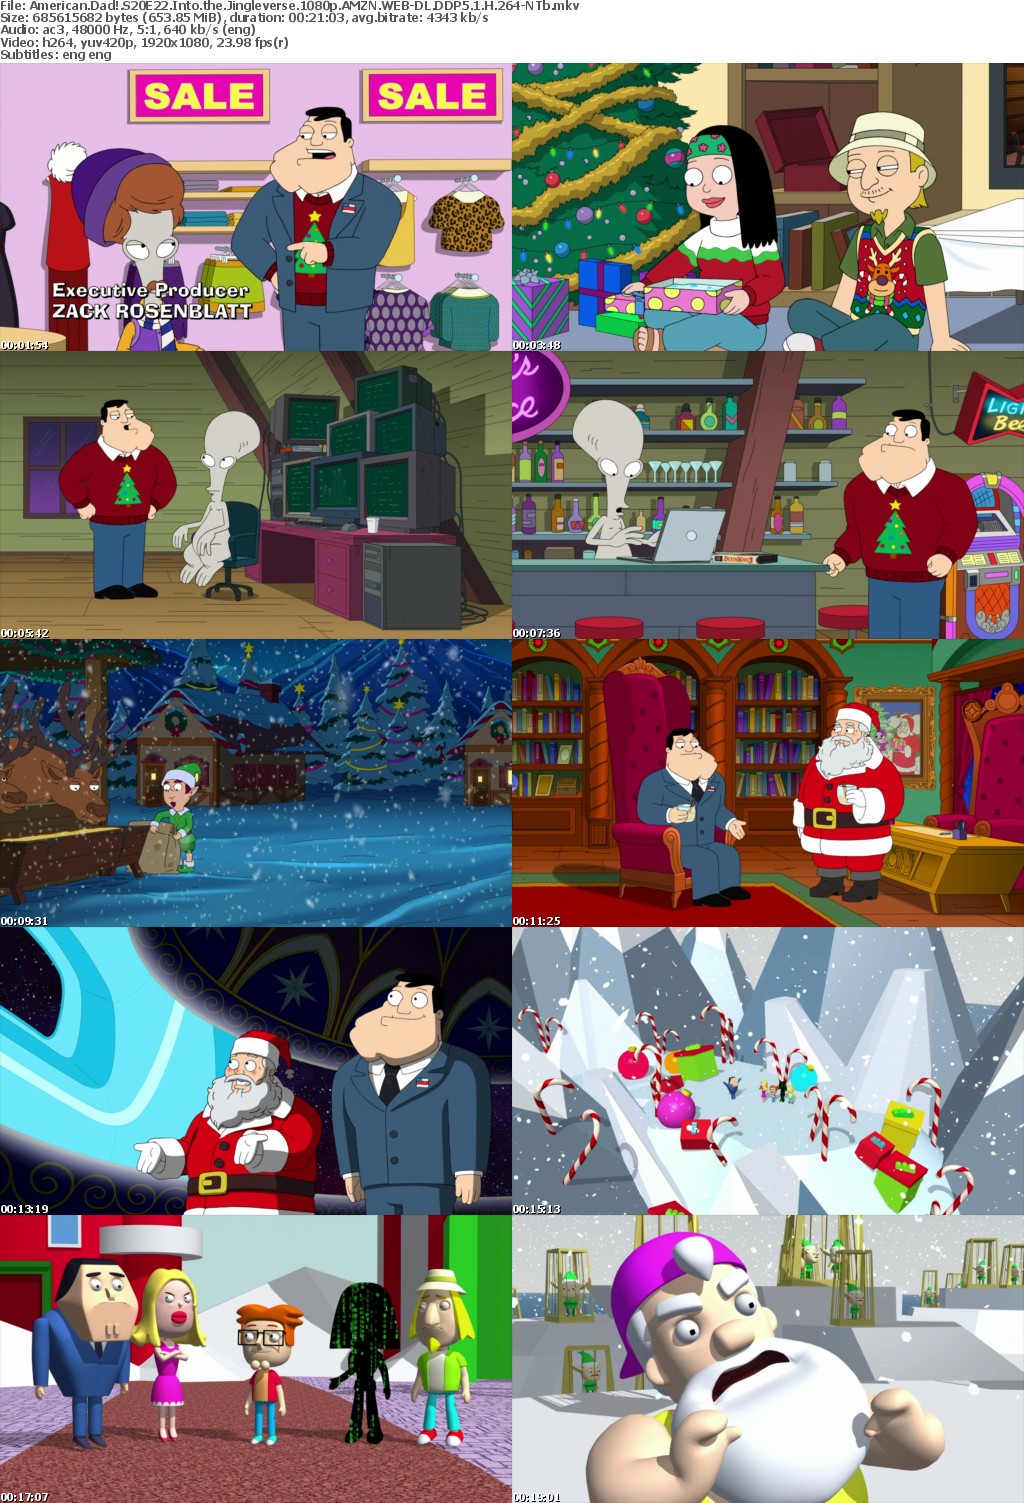 American Dad! S20E22 Into the Jingleverse 1080p AMZN WEB-DL DDP5 1 H 264-NTb